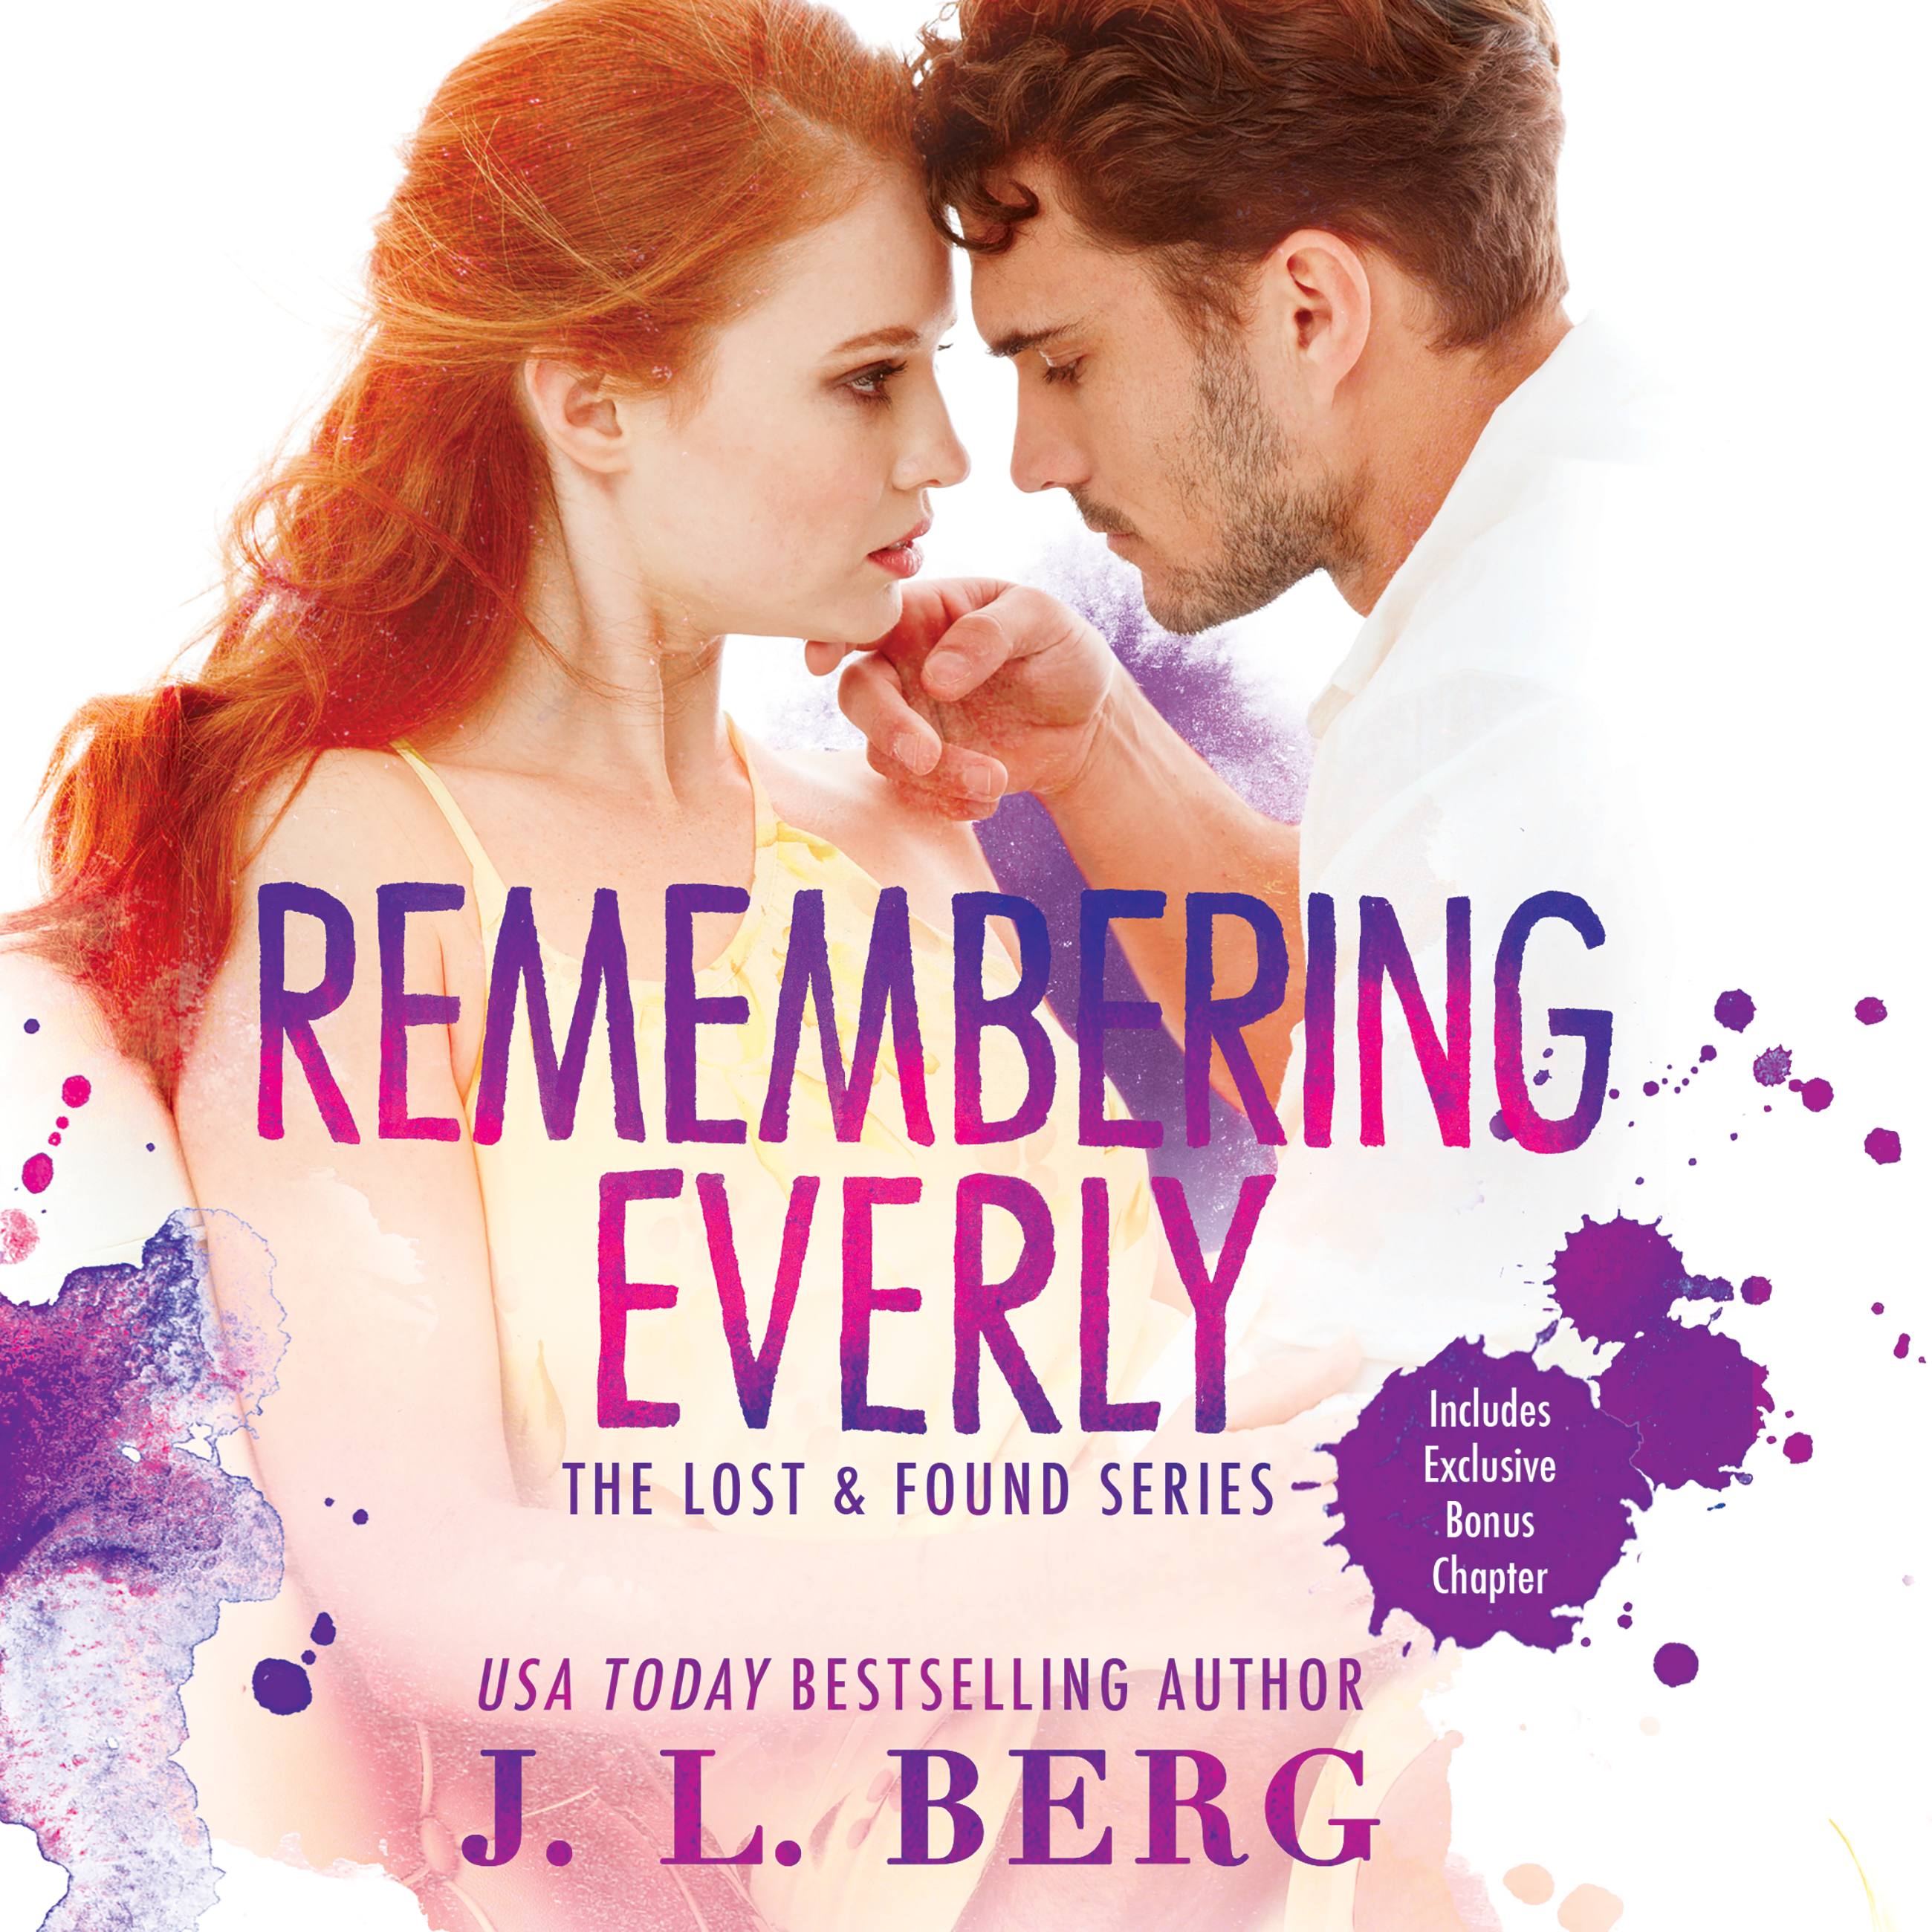 Remembering Everly by